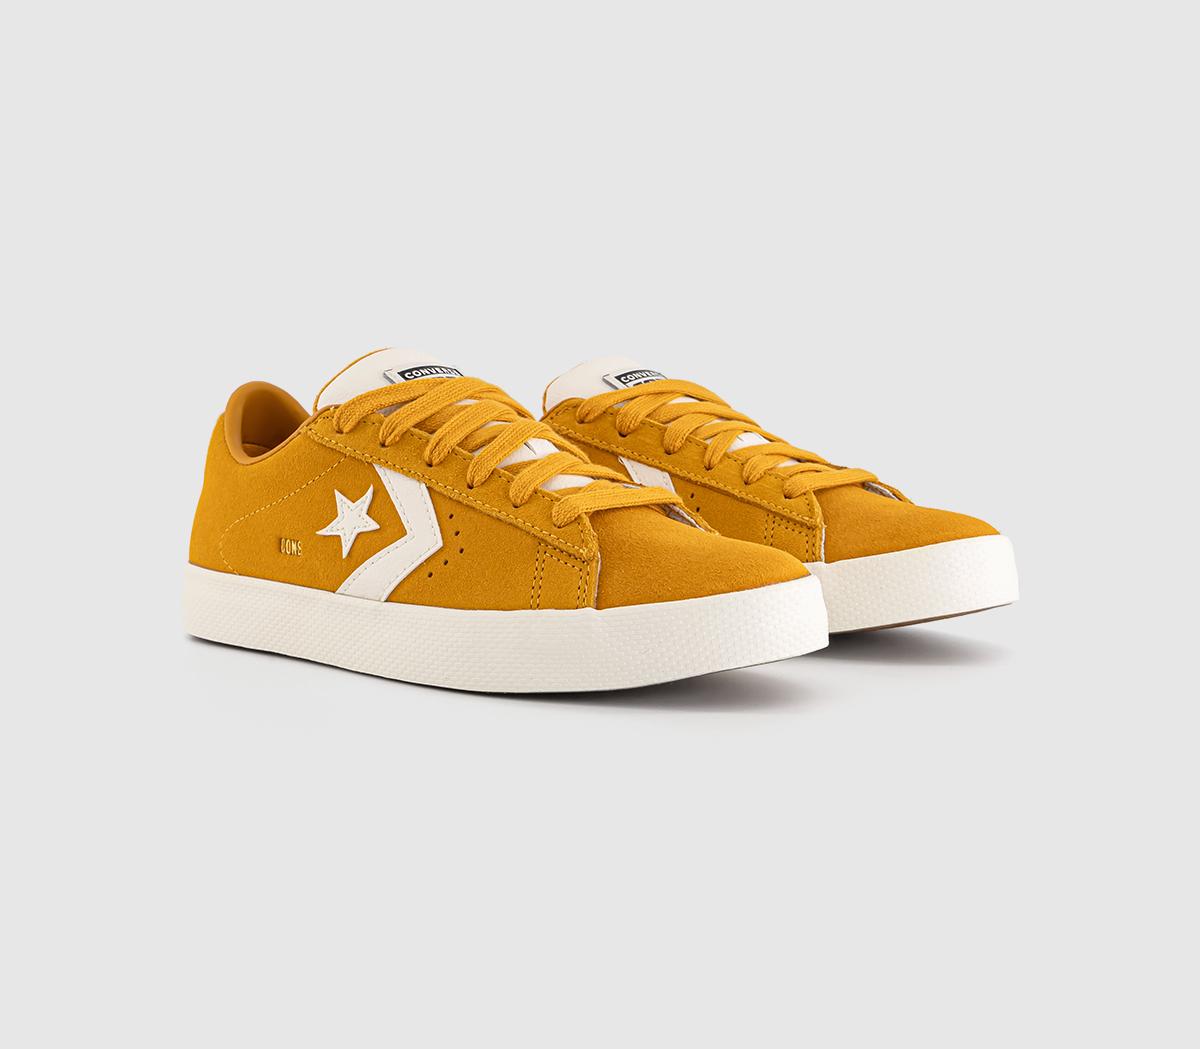 Converse Womens Pl Vulc Pro Ox Trainers Sunflower Gold Egret Yellow, 5